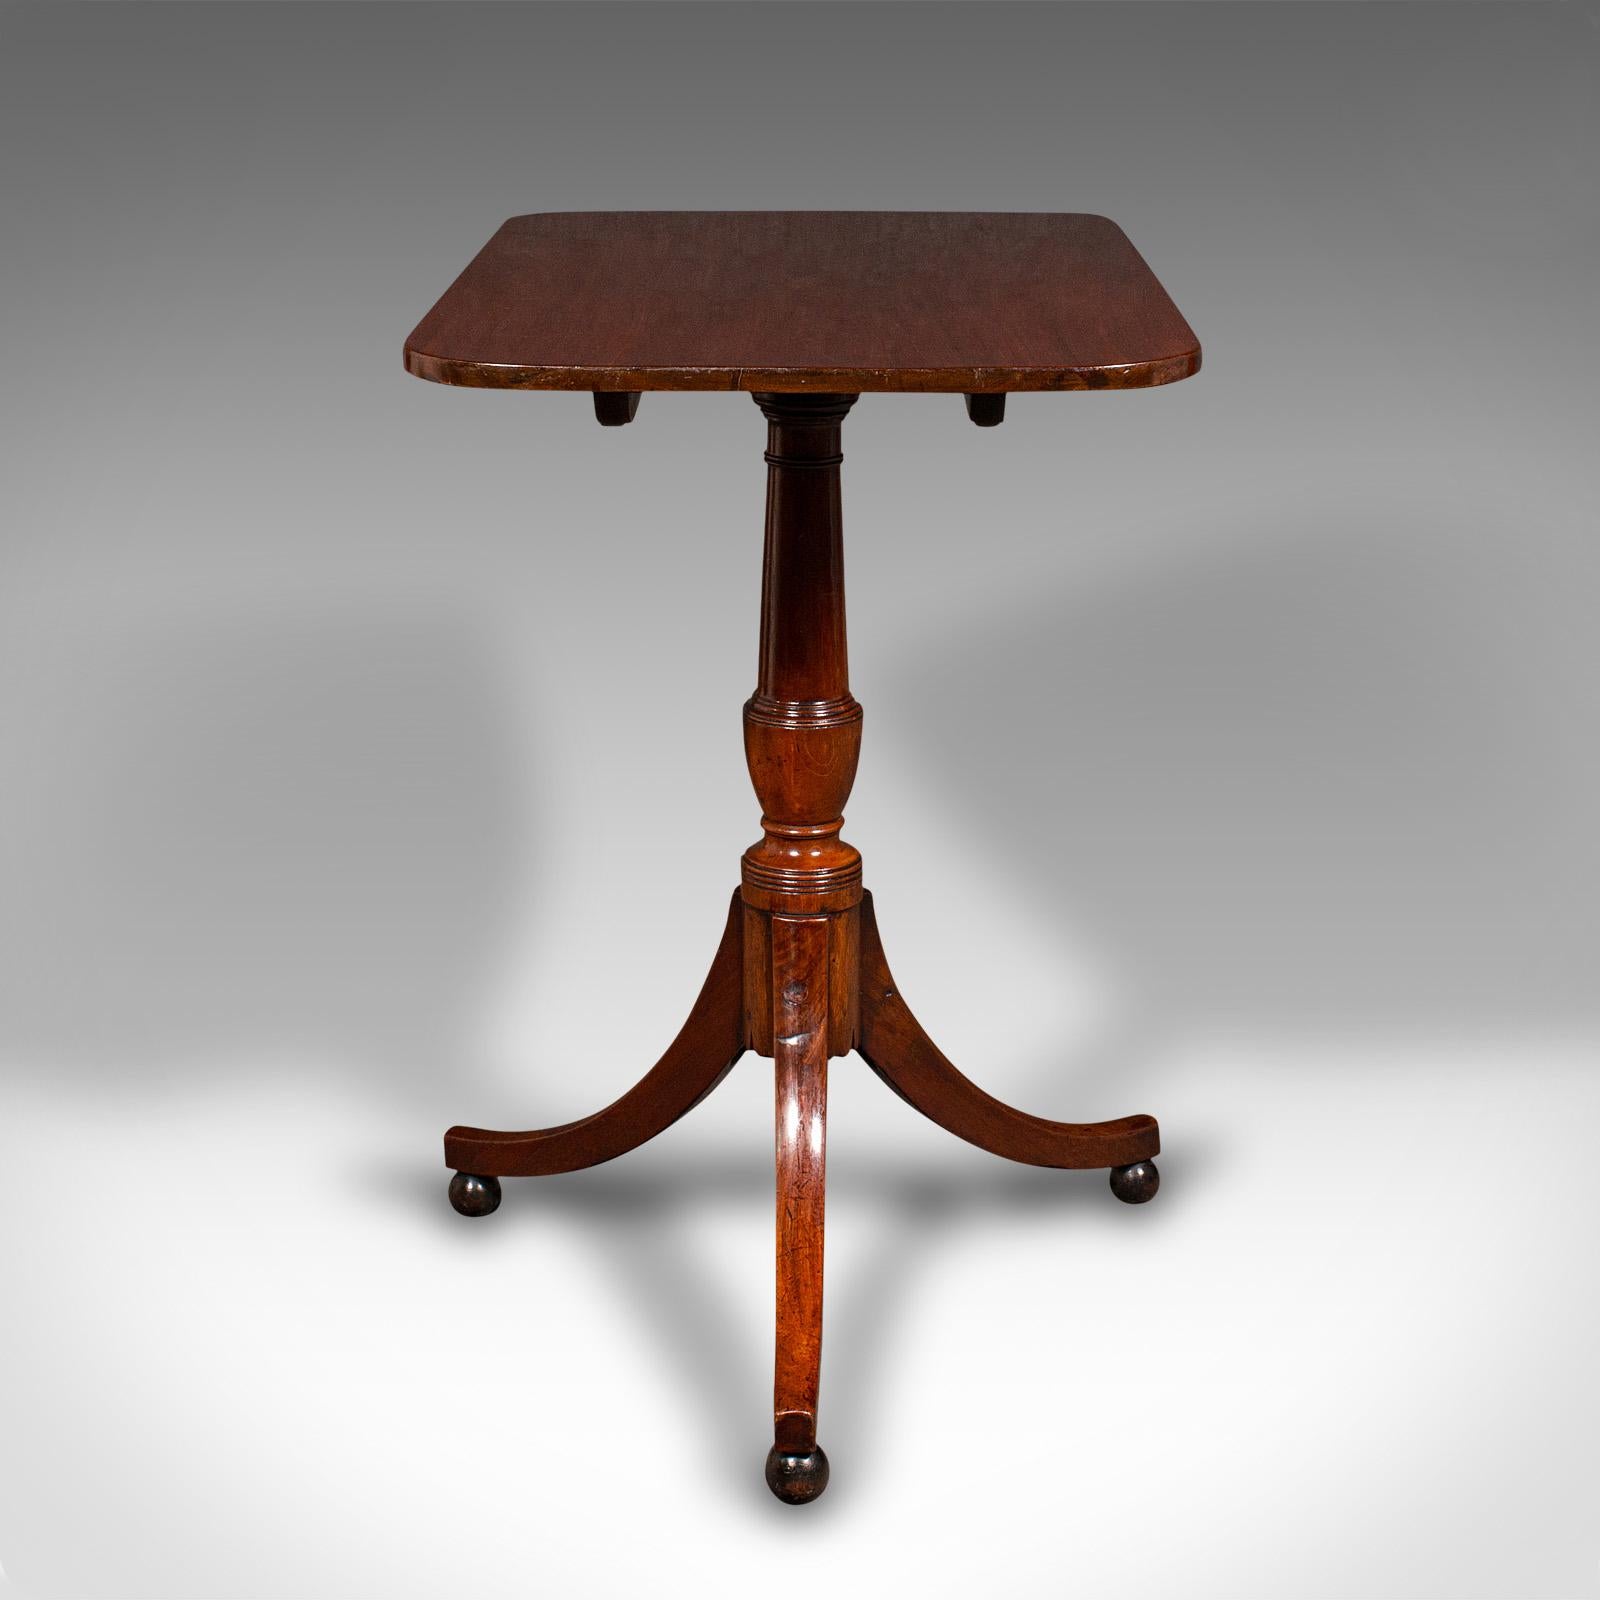 Wood Antique Supper Table, English, Snap Top, Lamp, Occasional, Regency, Circa 1820 For Sale